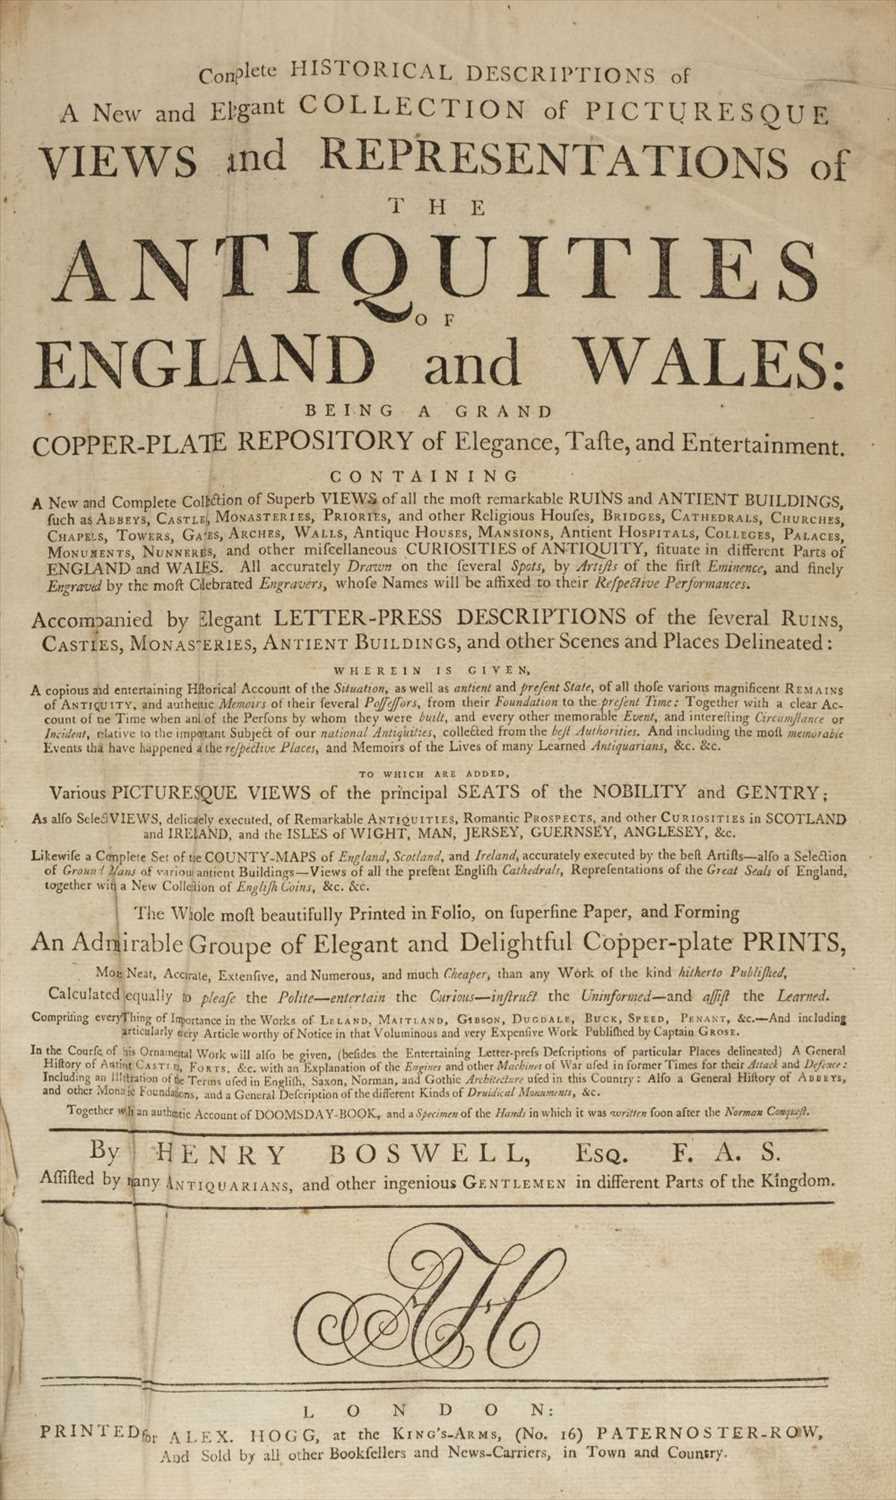 Lot 159 - Boswell (Henry). Complete Historical Descriptions..., Antiquities of England and Wales, circa 1790